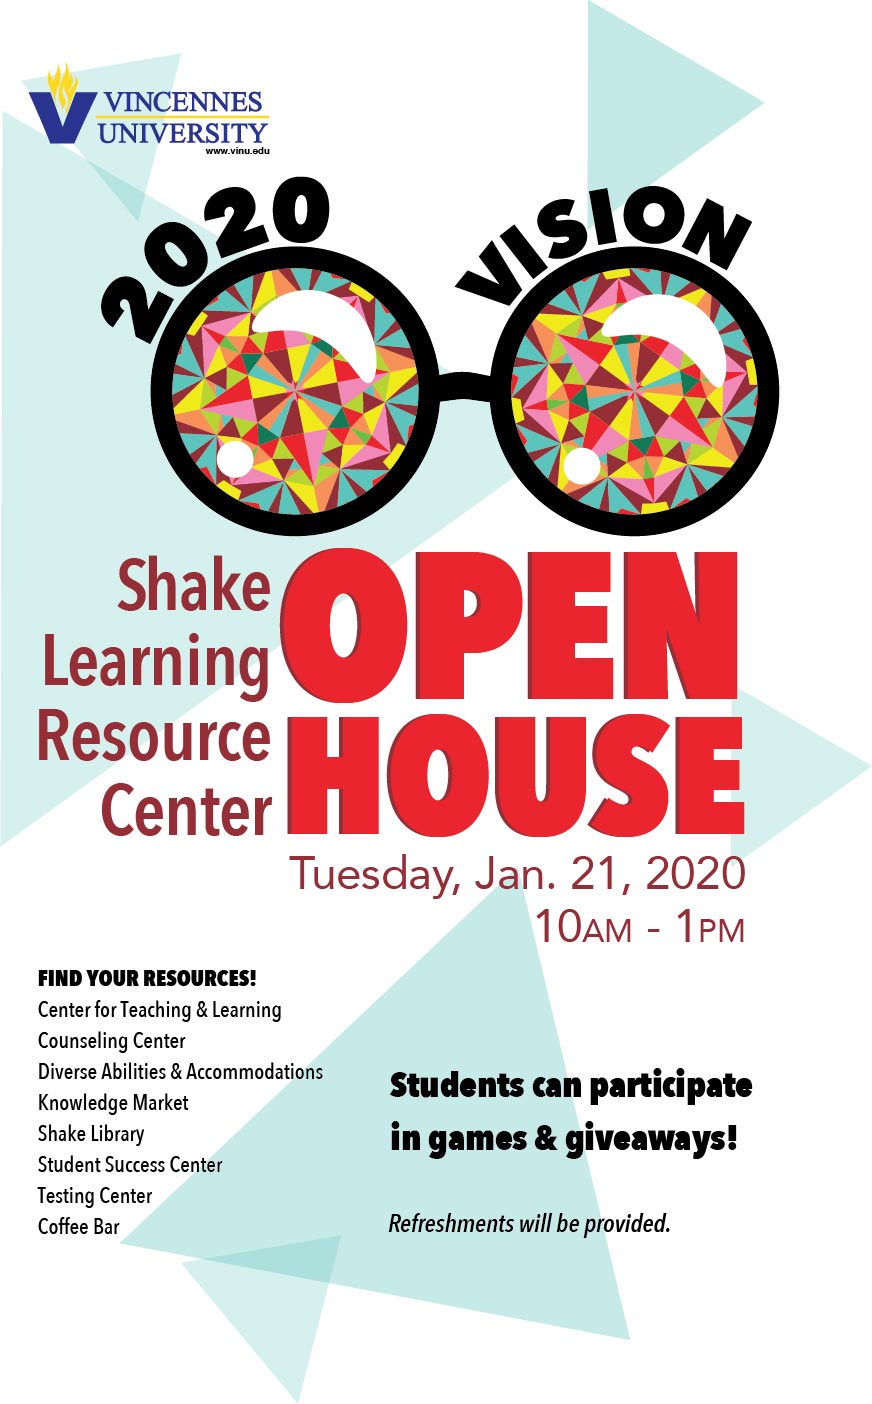 Shake Learning Resource Center Open House